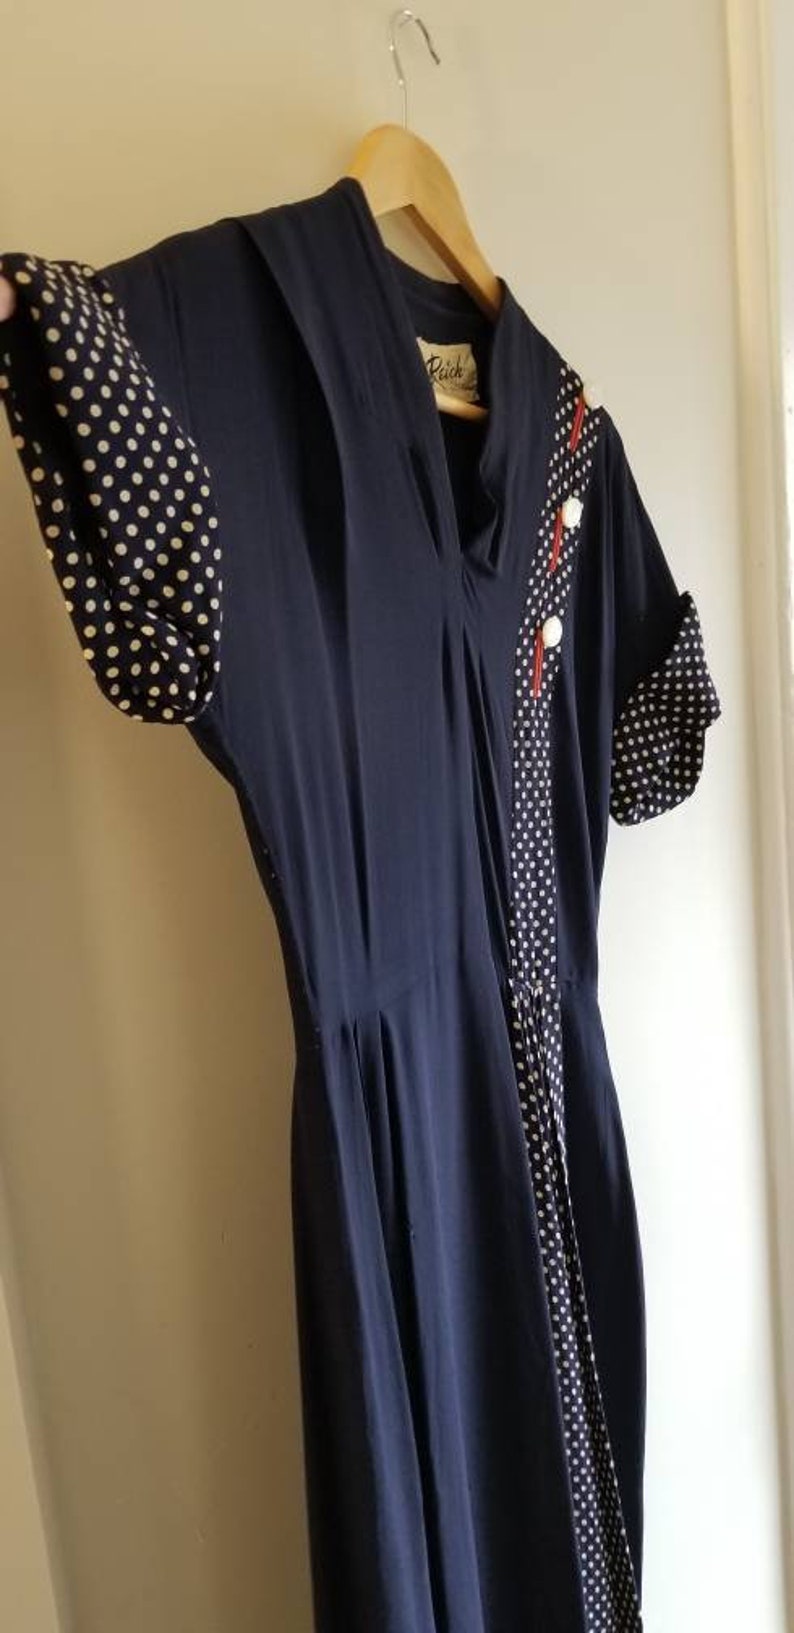 1940s Vintage Navy Blue Dress With White Polka Dots Reich - Etsy